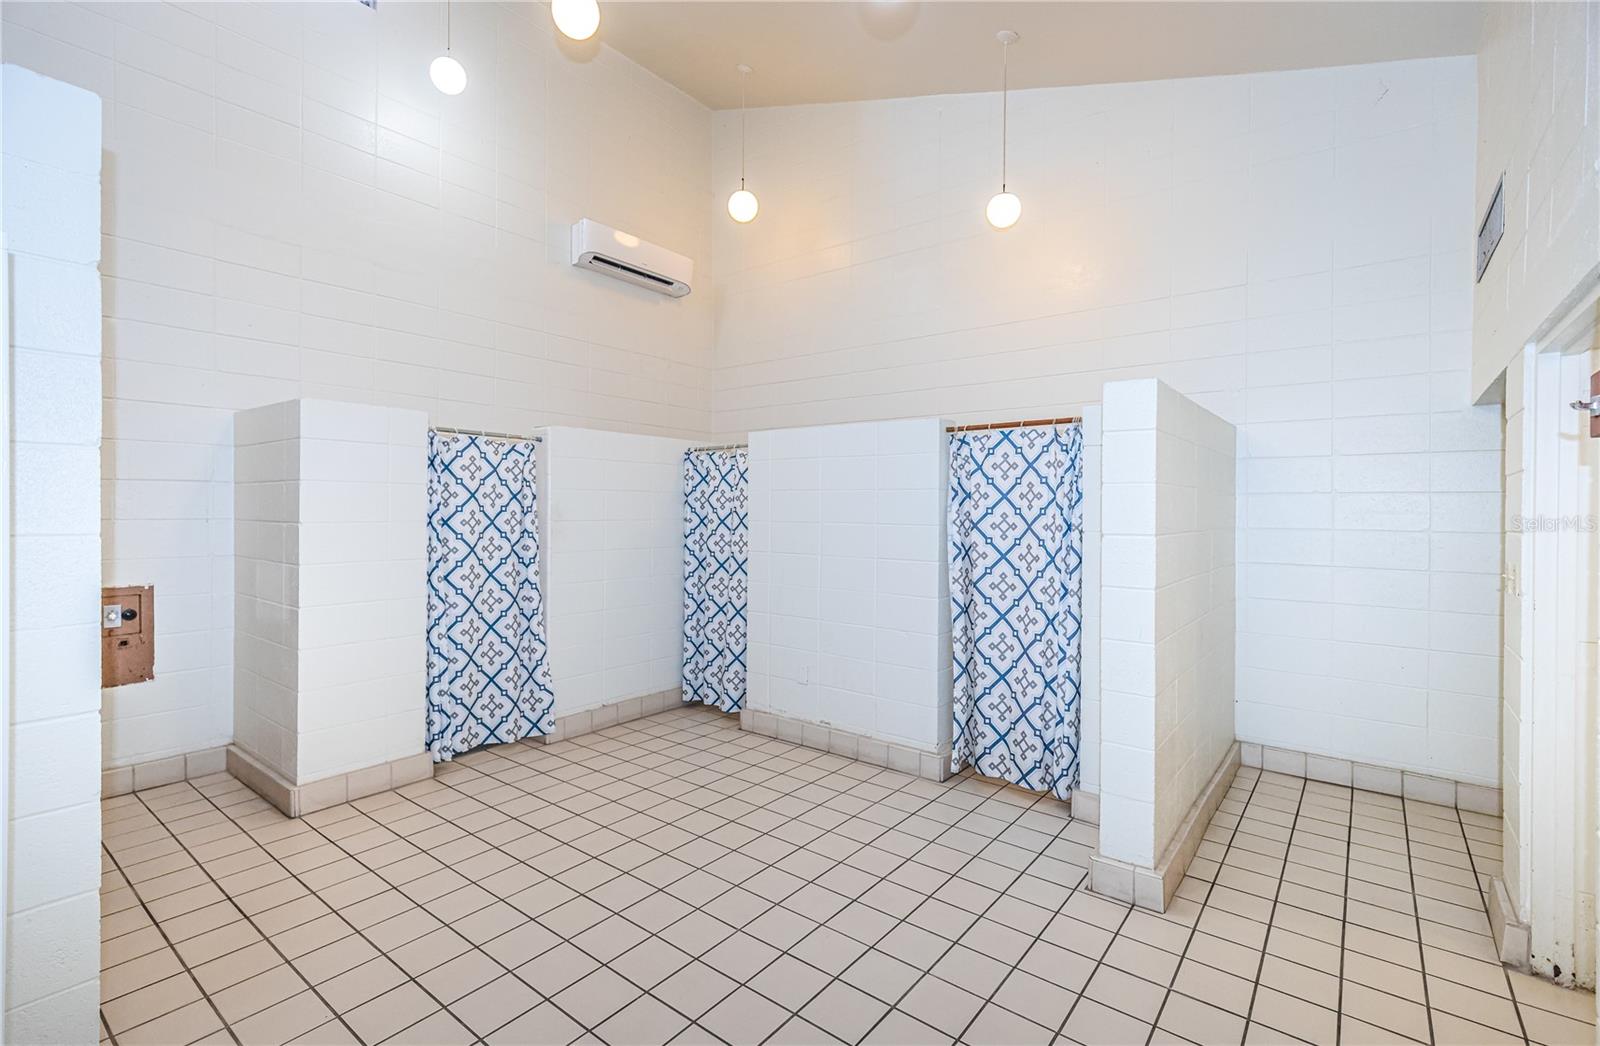 community bathroom, showers and dressing rooms